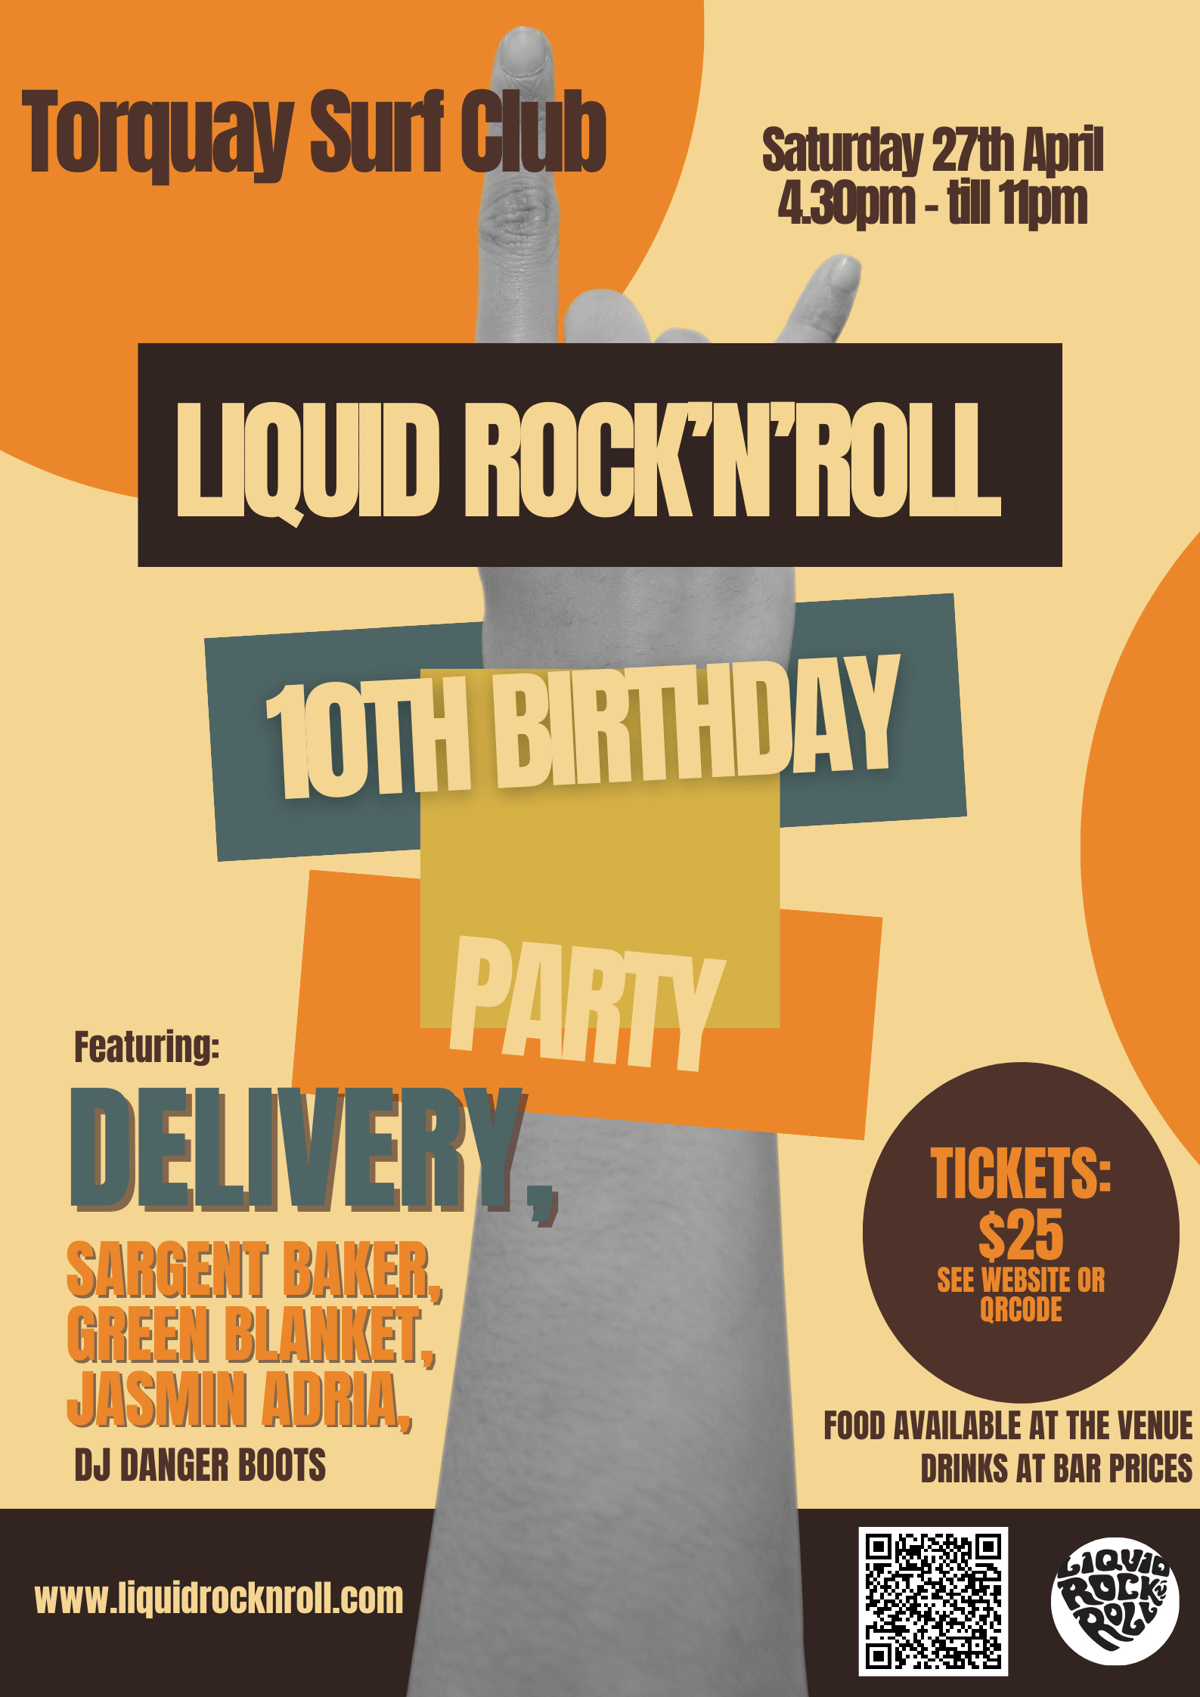 Image of Liquid Rock'n'Roll 10th Birthday Party